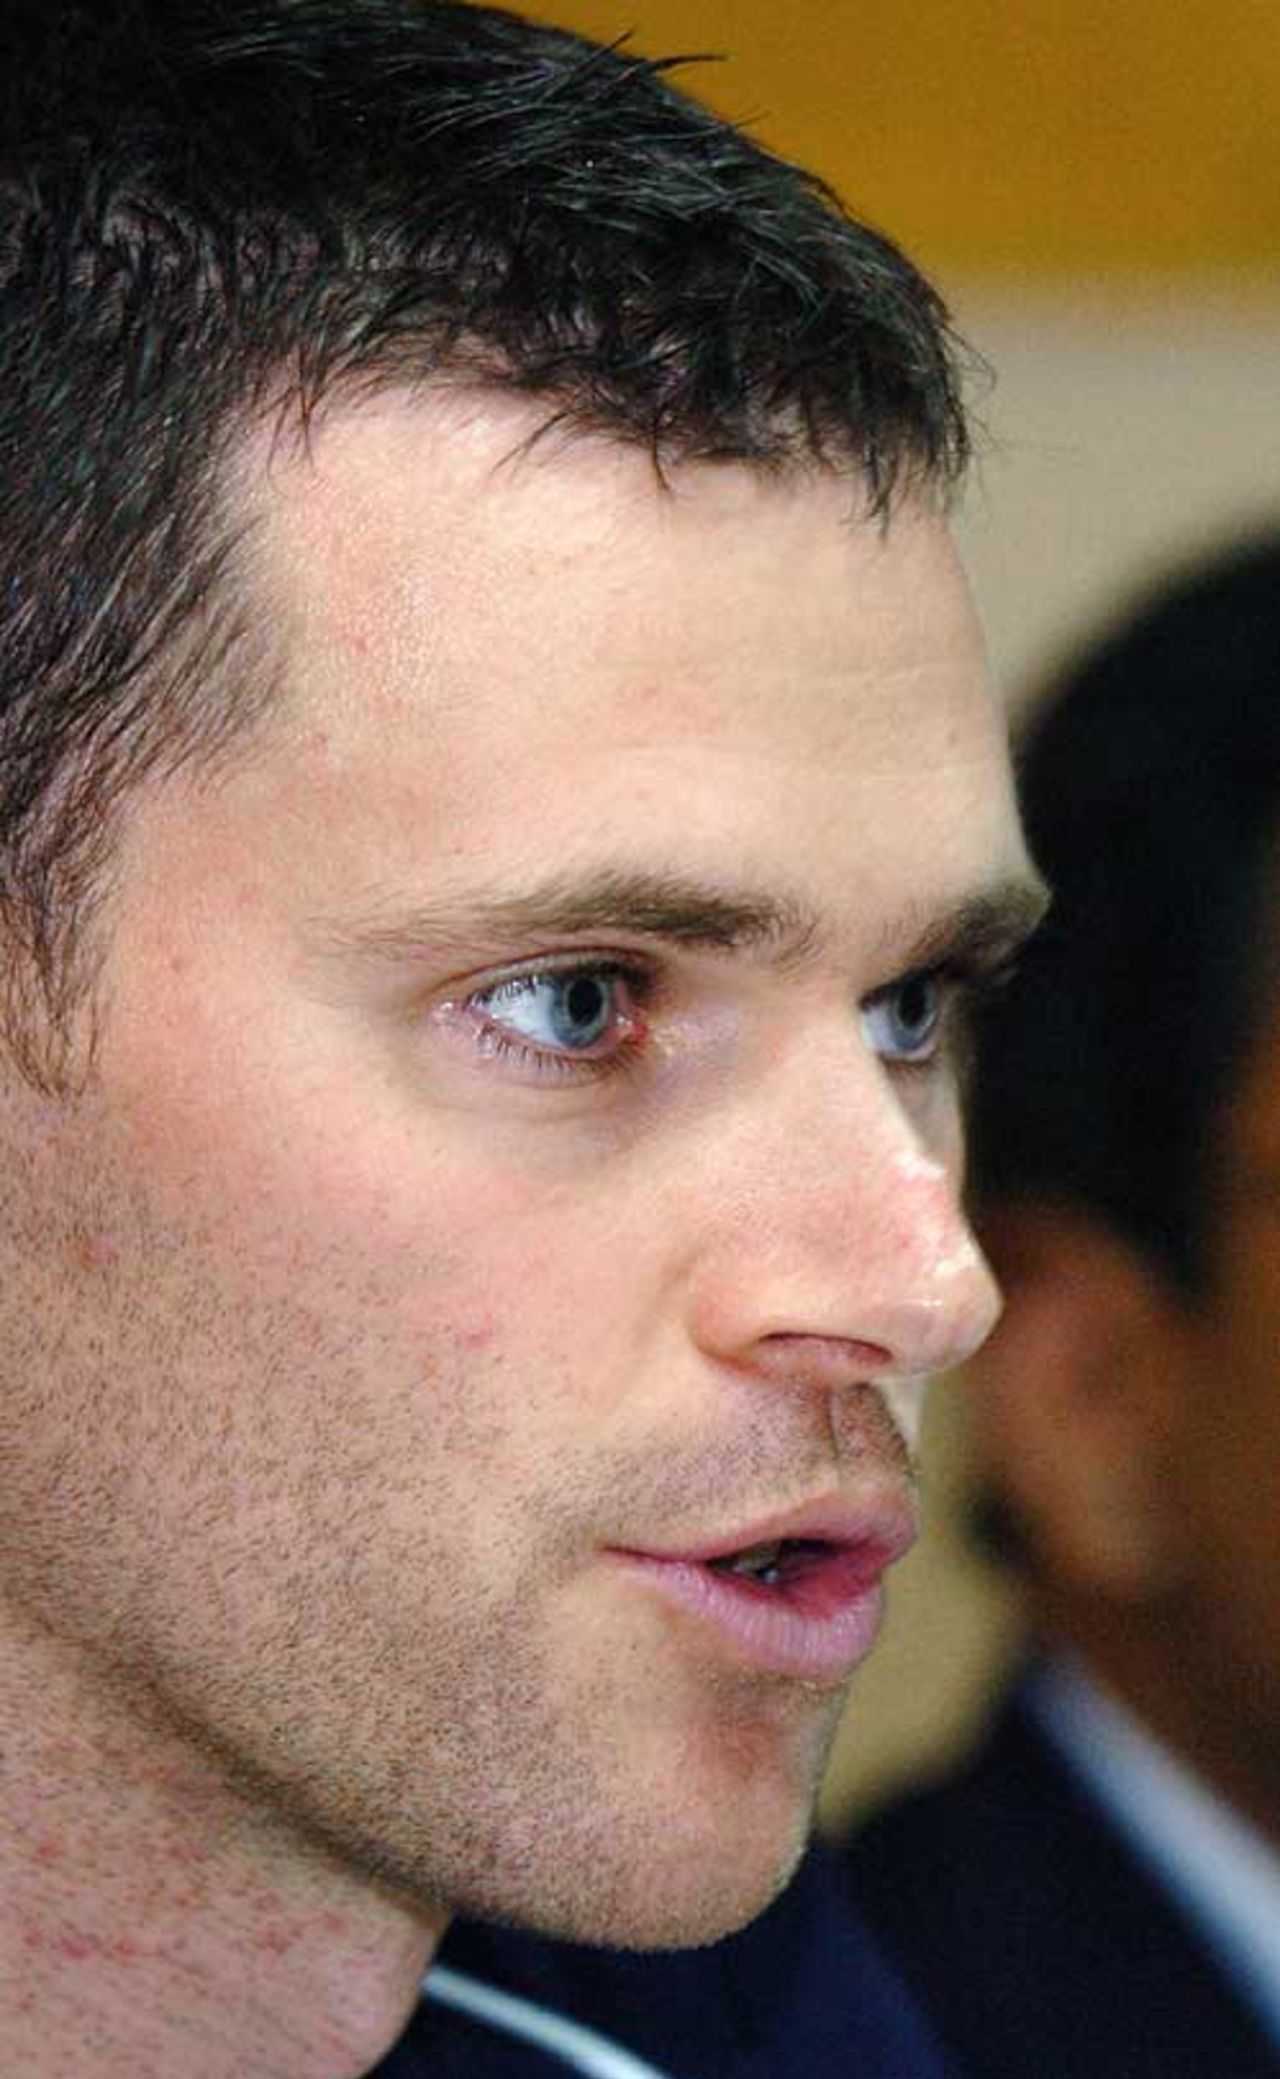 Craig Wright, the Scotland captain, attends his first press conference after arriving in Bangladesh, Dhaka, December 12, 2006